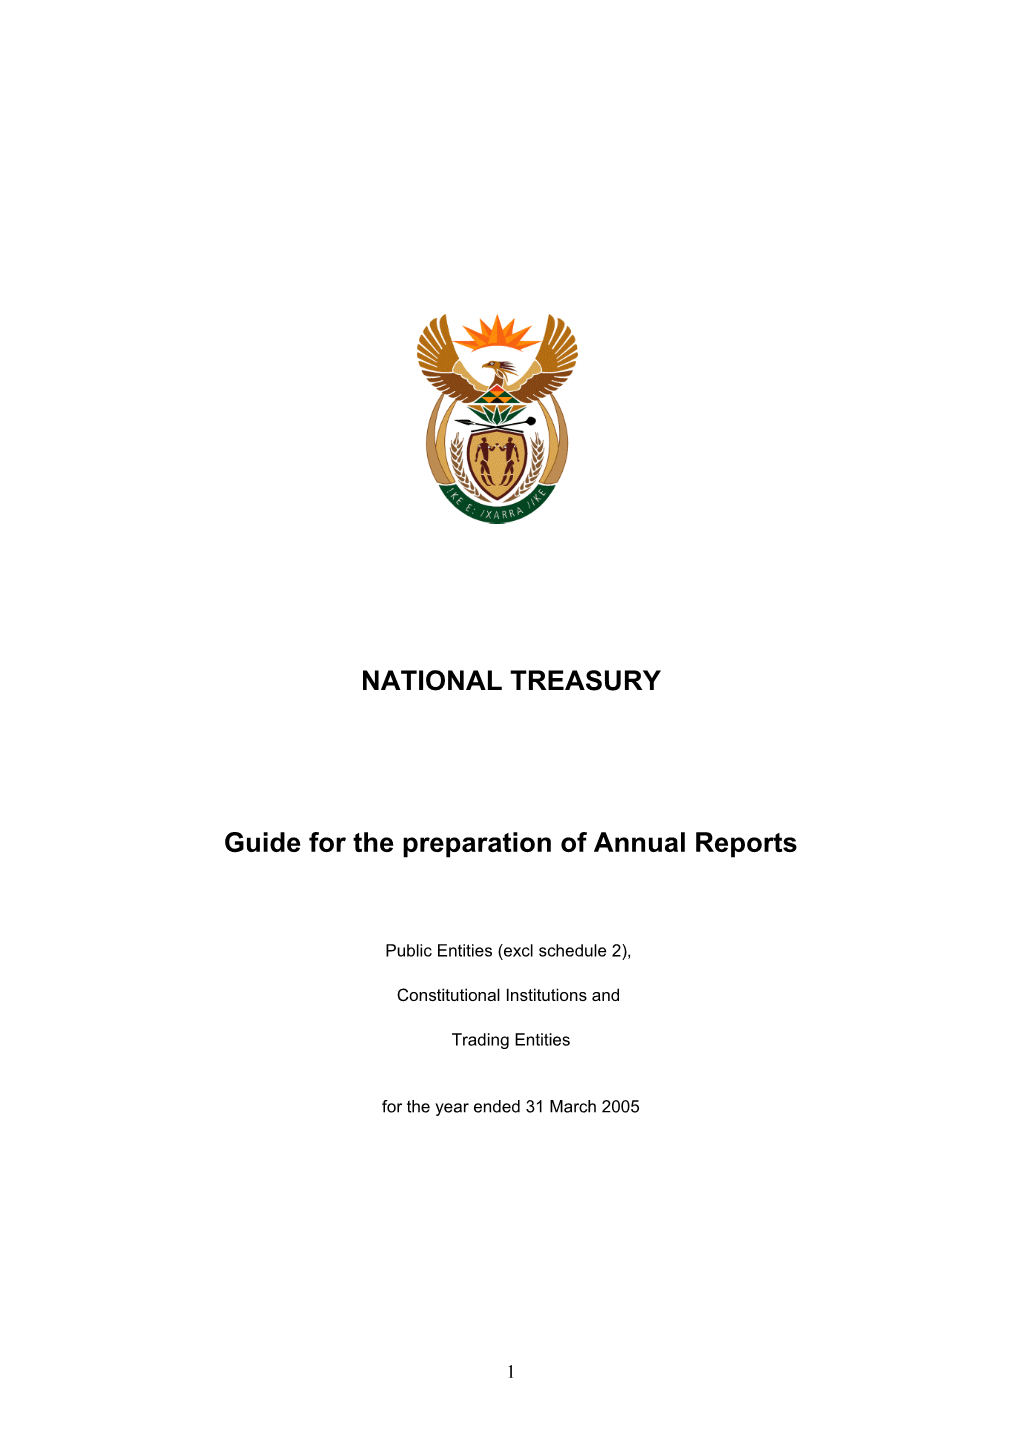 Guide for the Preparation of Annual Reports